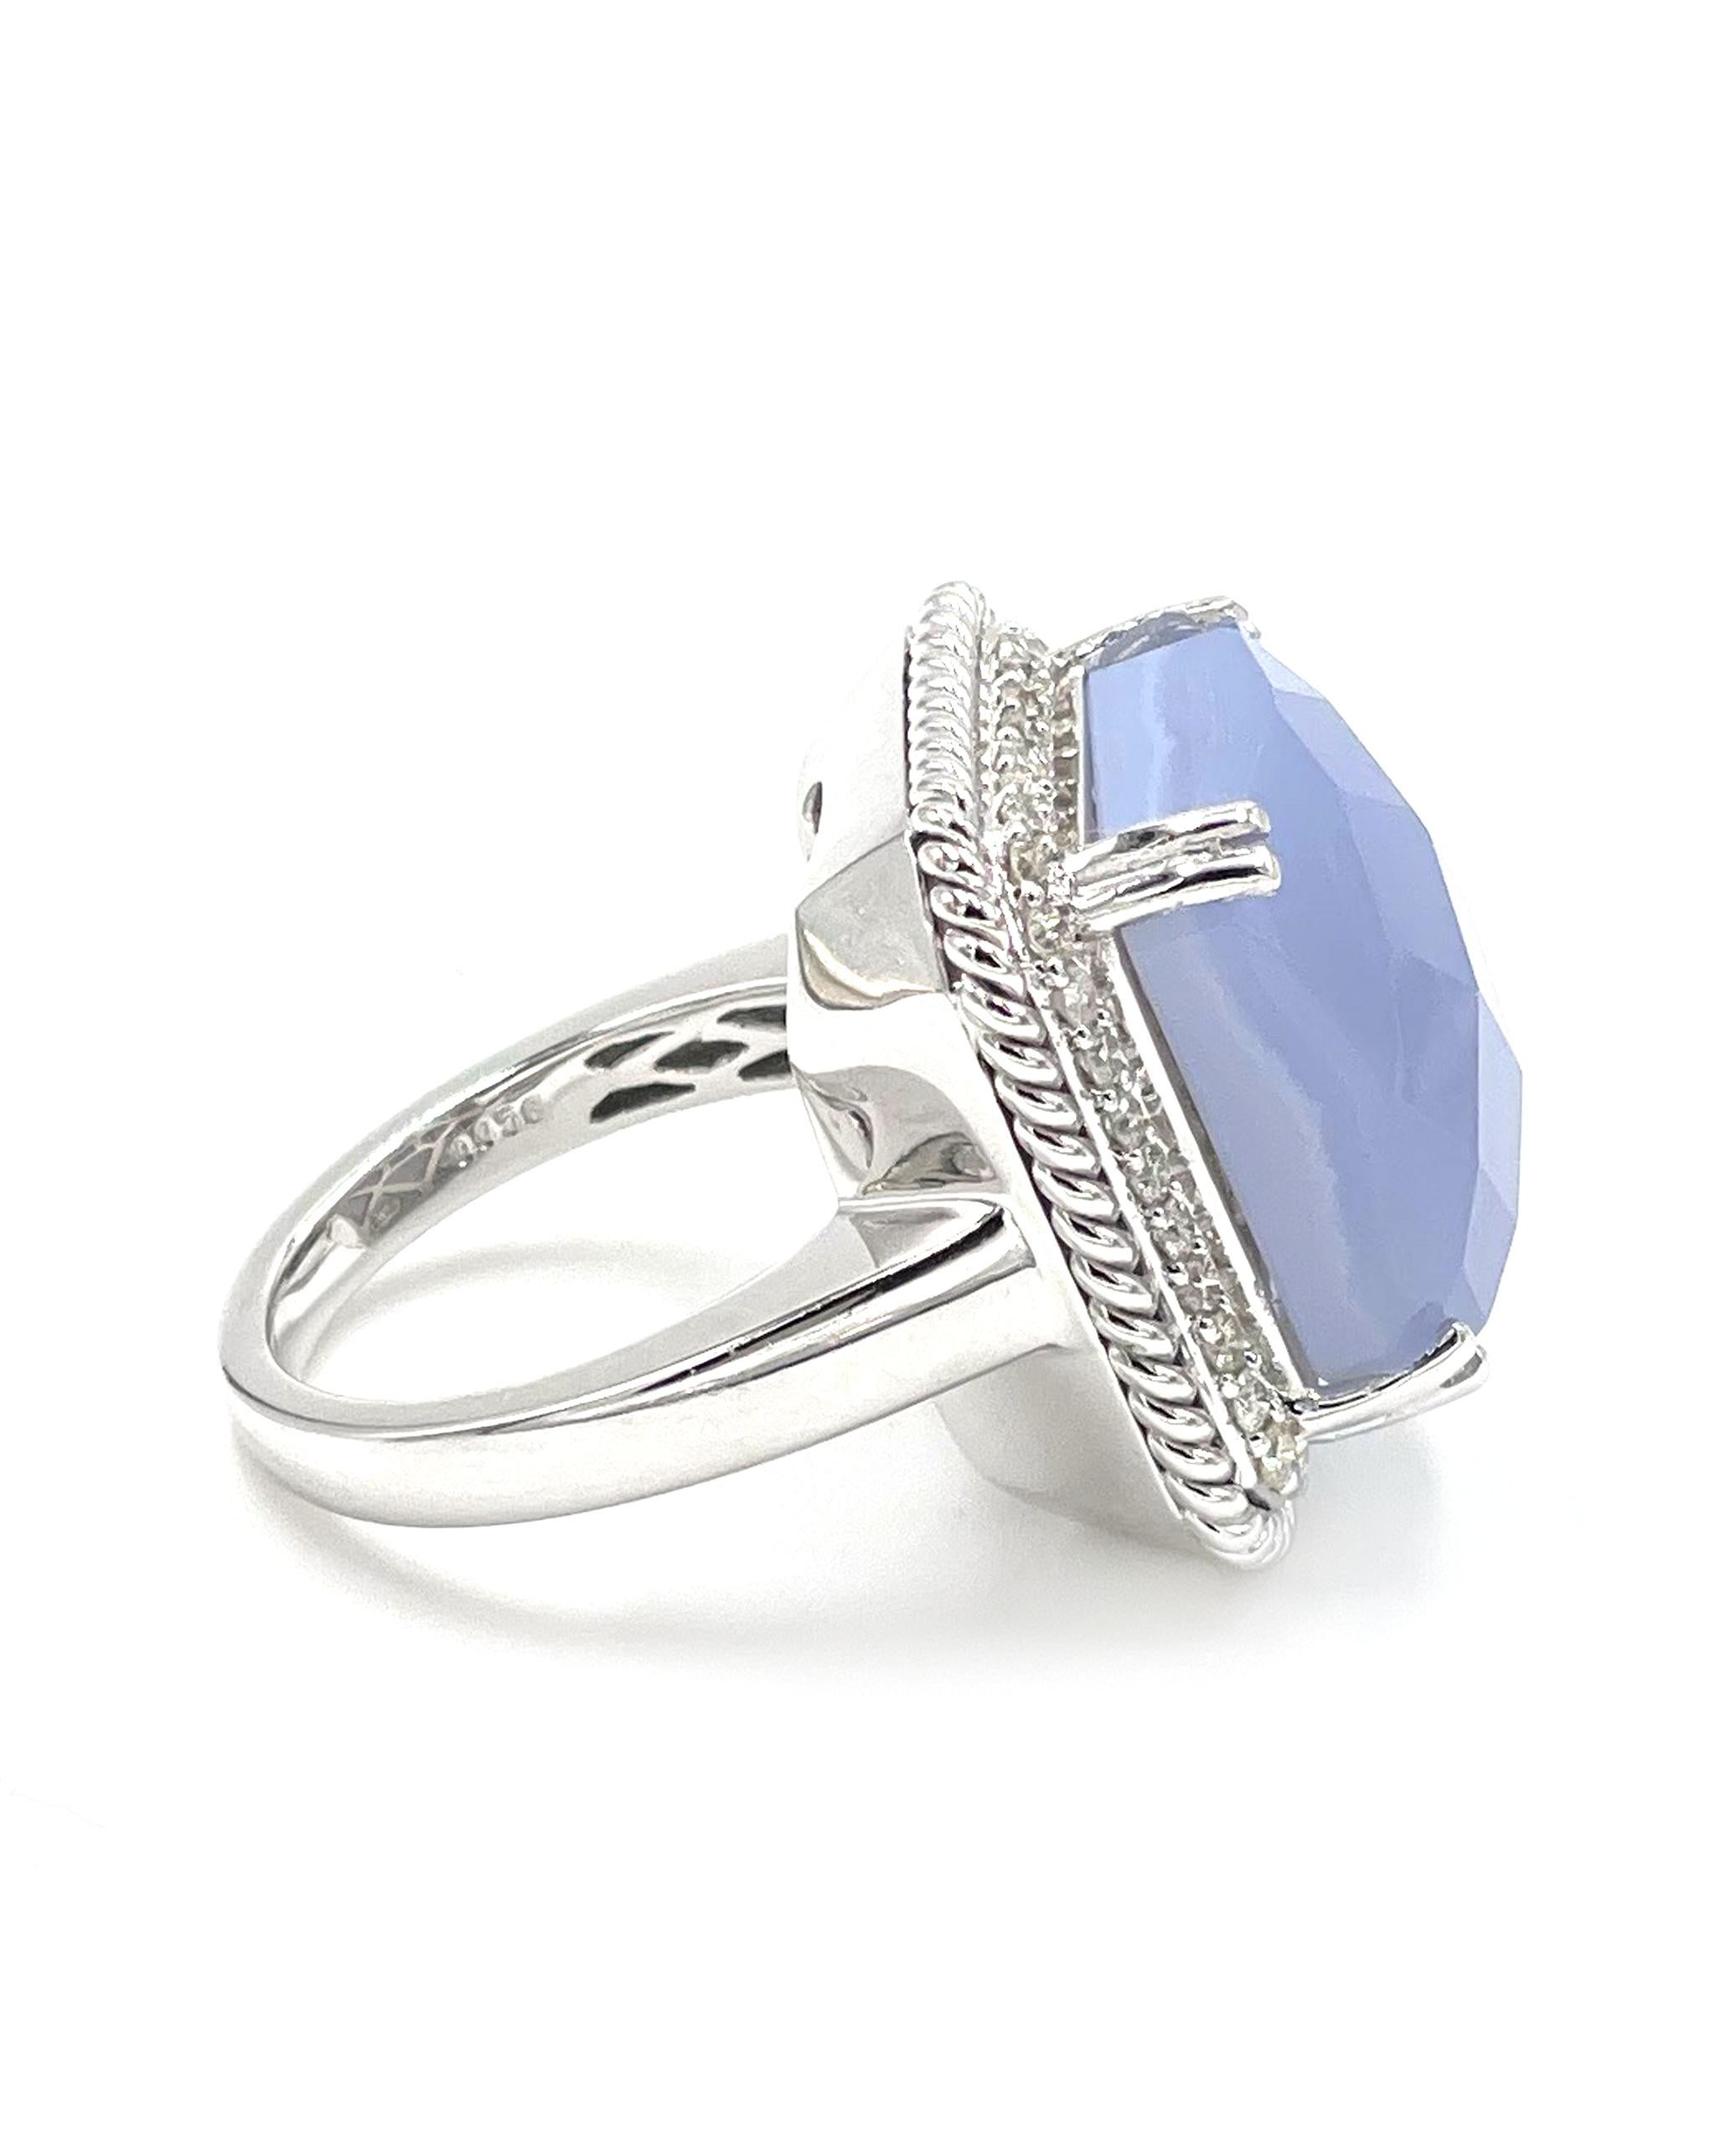 14K White Gold Right Hand Ring with Diamonds and Chalcedony In New Condition For Sale In Old Tappan, NJ